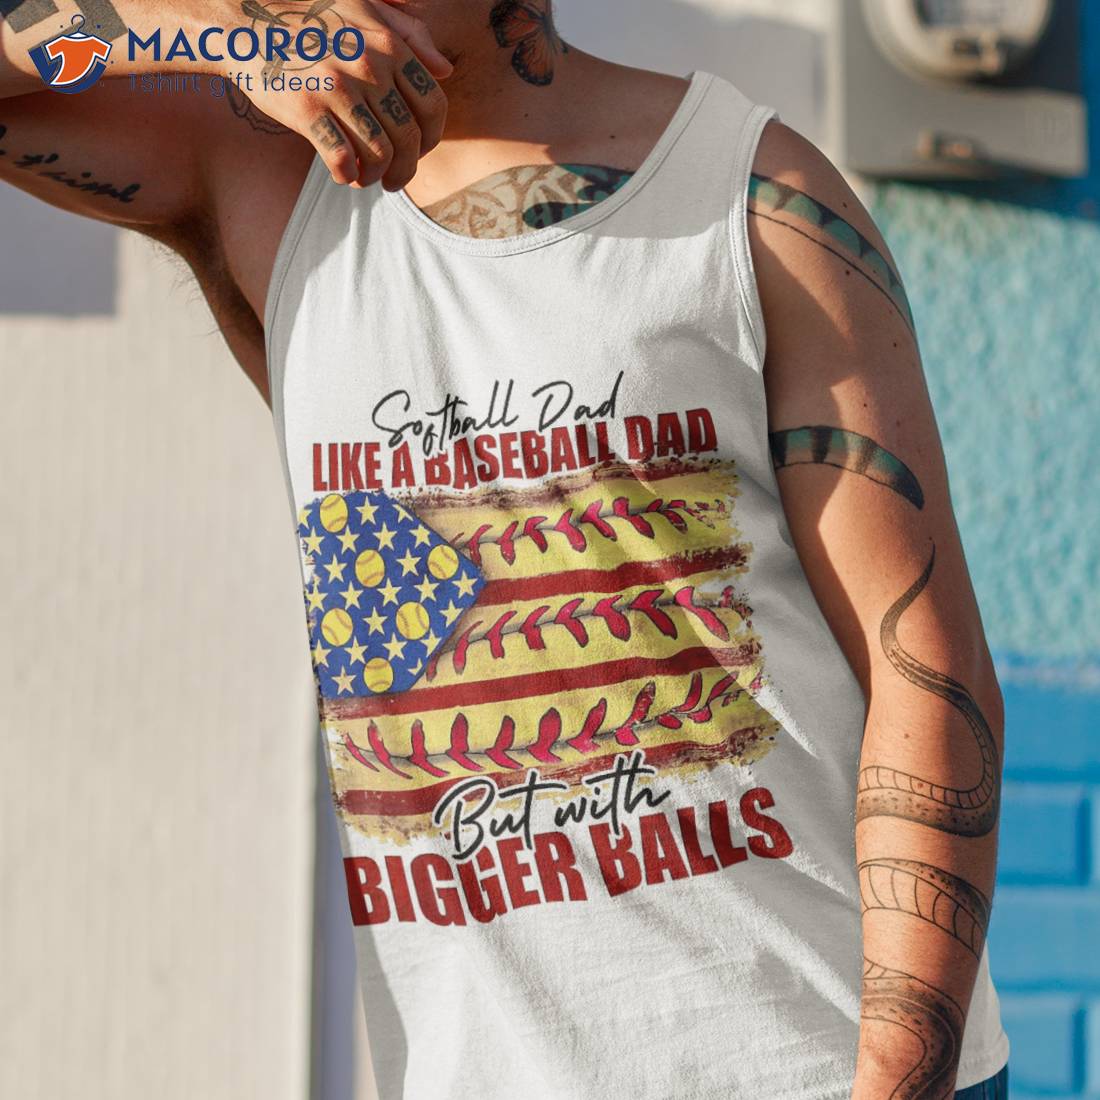 Copy of Softball Dad Like a baseball Dad but with bigger balls Funny  Father's Day Meme | Sleeveless Top